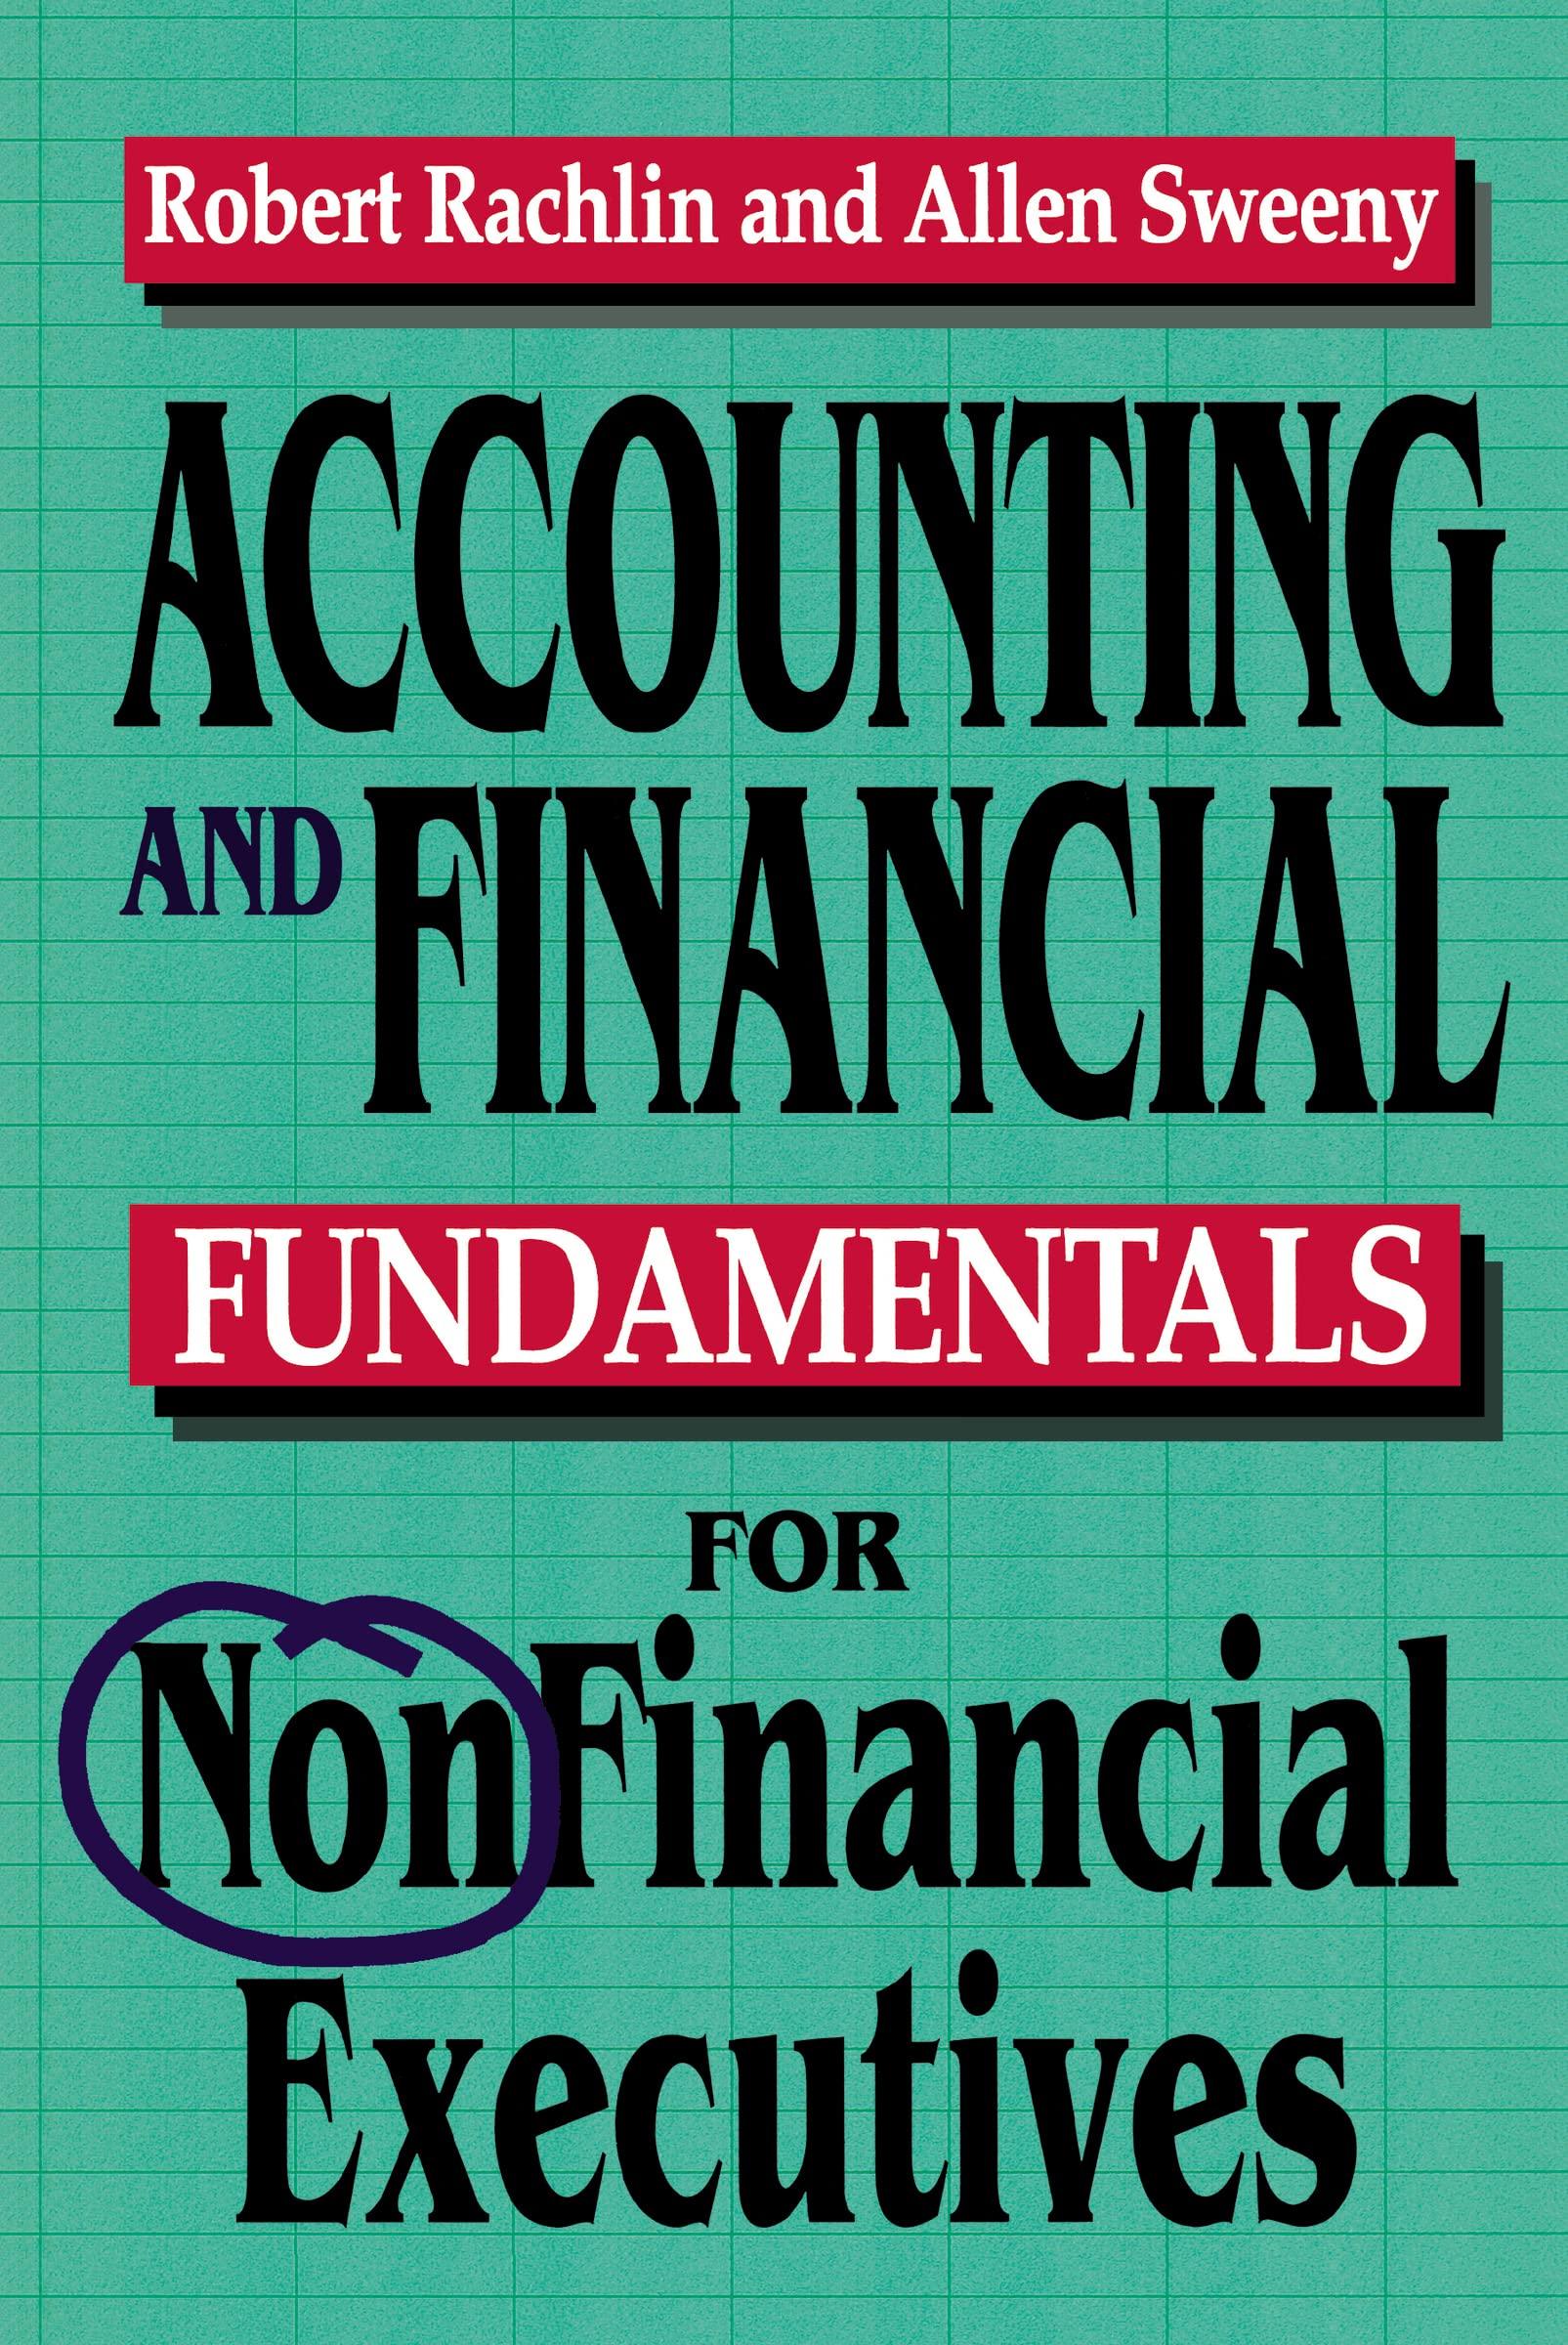 accounting and financial fundamentals for nonfinancial executives 1st edition robert rachlin, allen sweeny